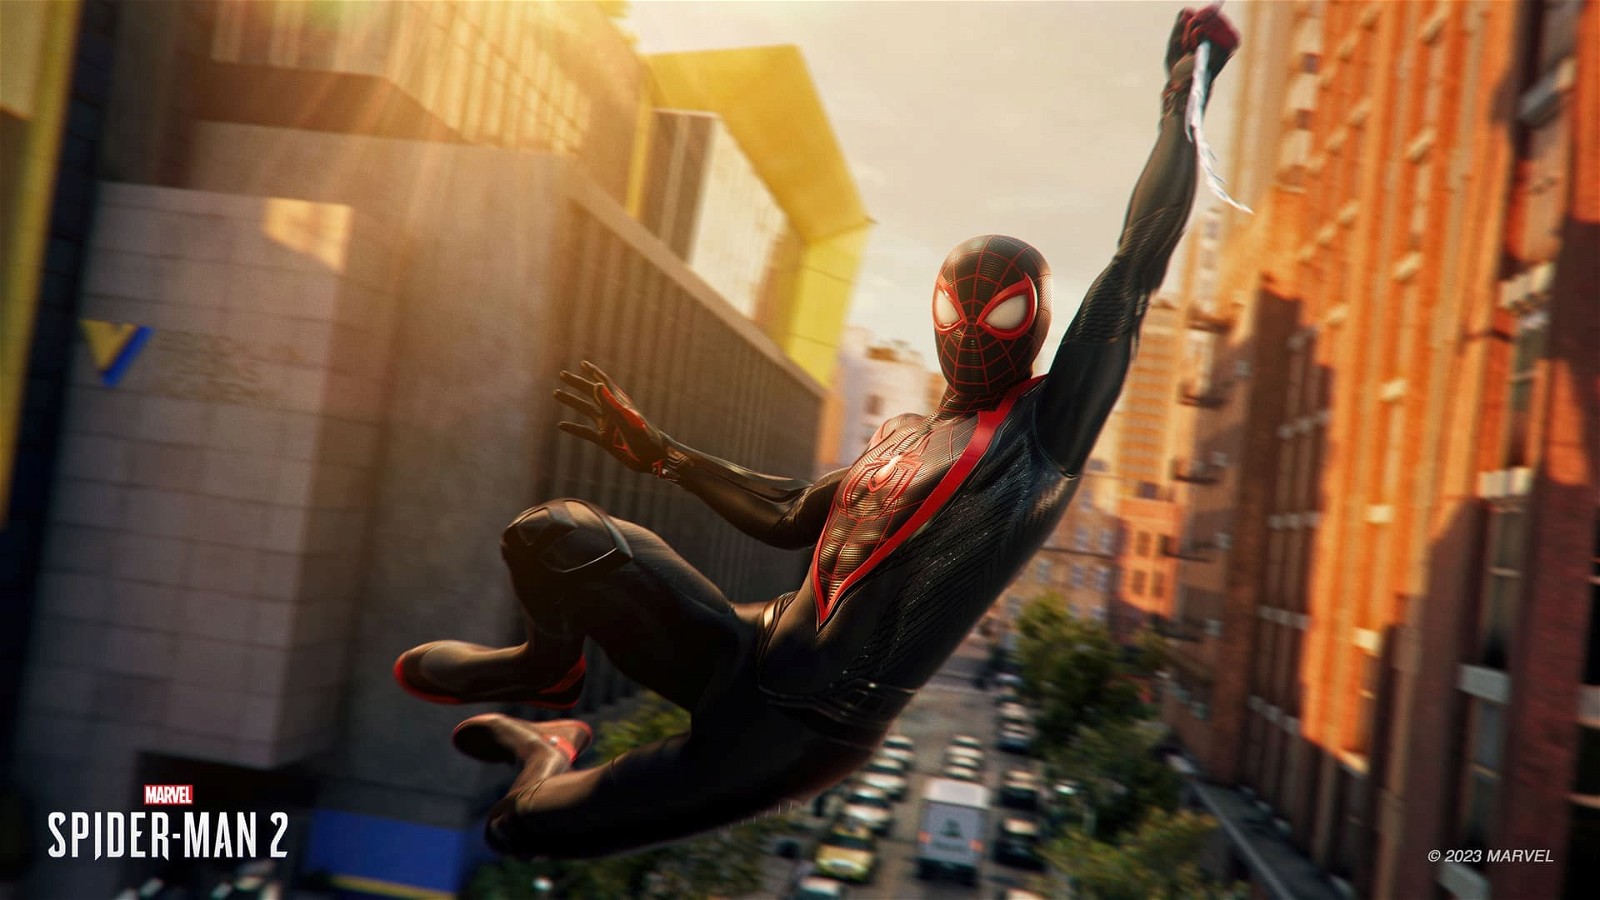 Yuri Lowenthal wants to play Peter Parker in the video games forever, if possible